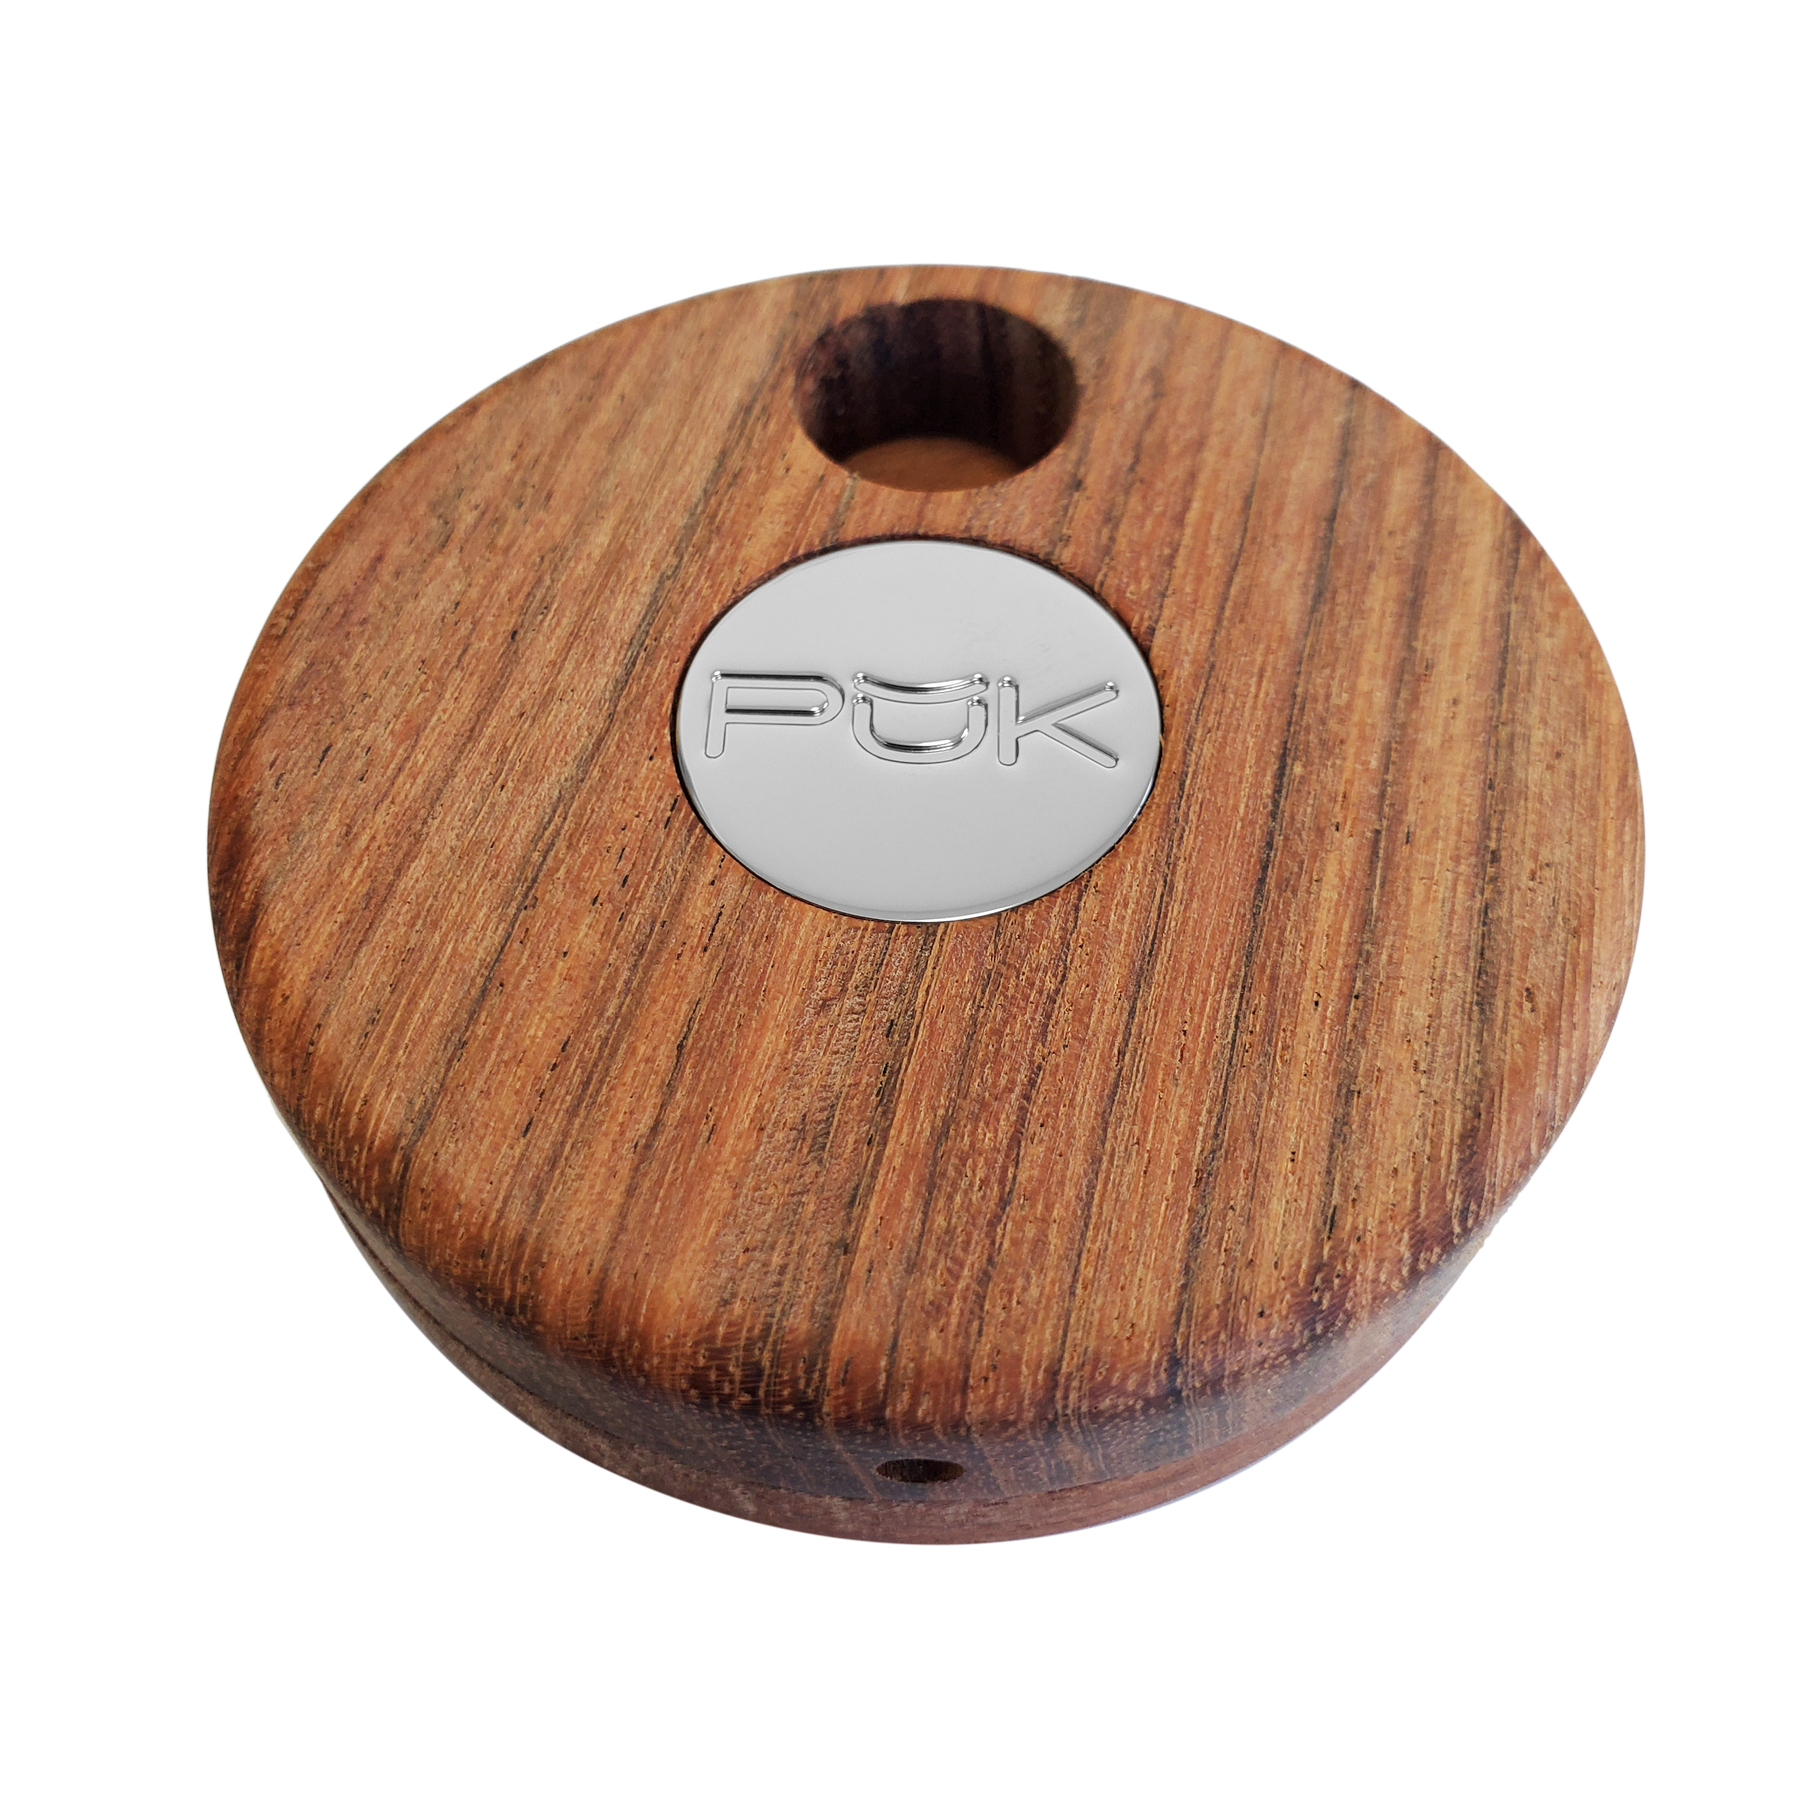 Wood PŬK Cannabis Container and Smoking Device